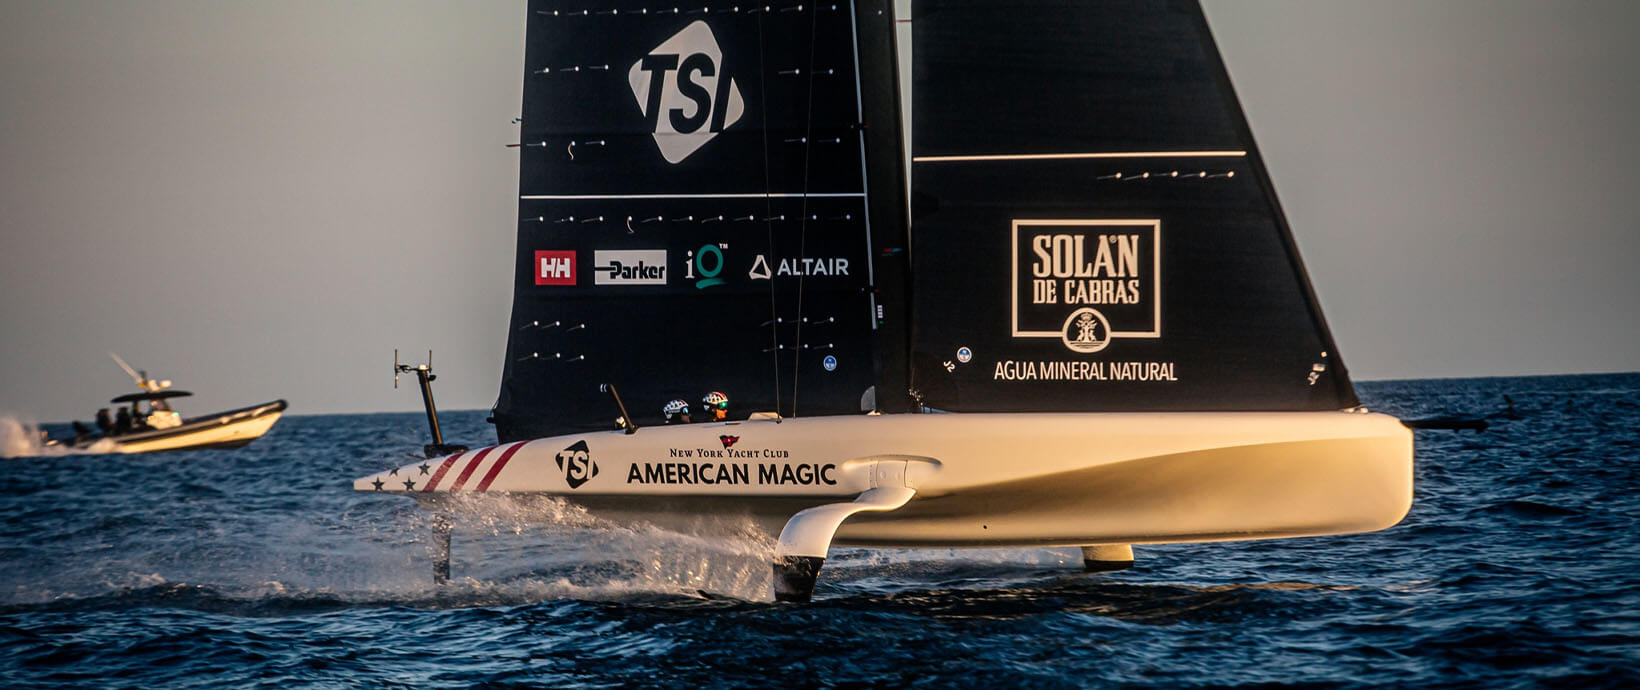 Altair and American Magic: Optimizing Critical CFD and Structural Analyses for the 37th America’s Cup